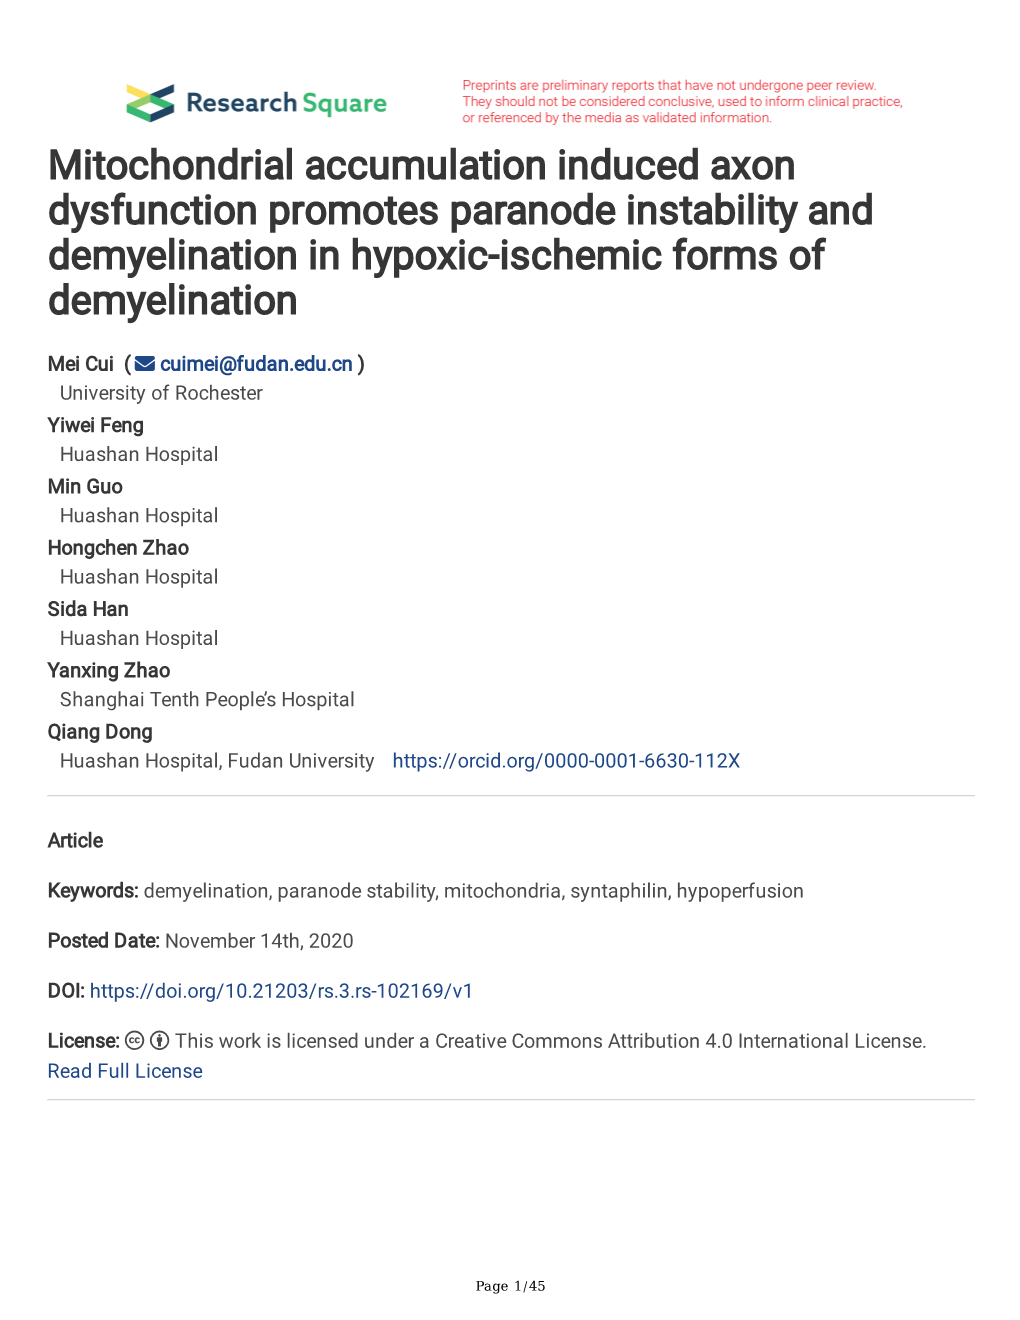 Mitochondrial Accumulation Induced Axon Dysfunction Promotes Paranode Instability and Demyelination in Hypoxic-Ischemic Forms of Demyelination